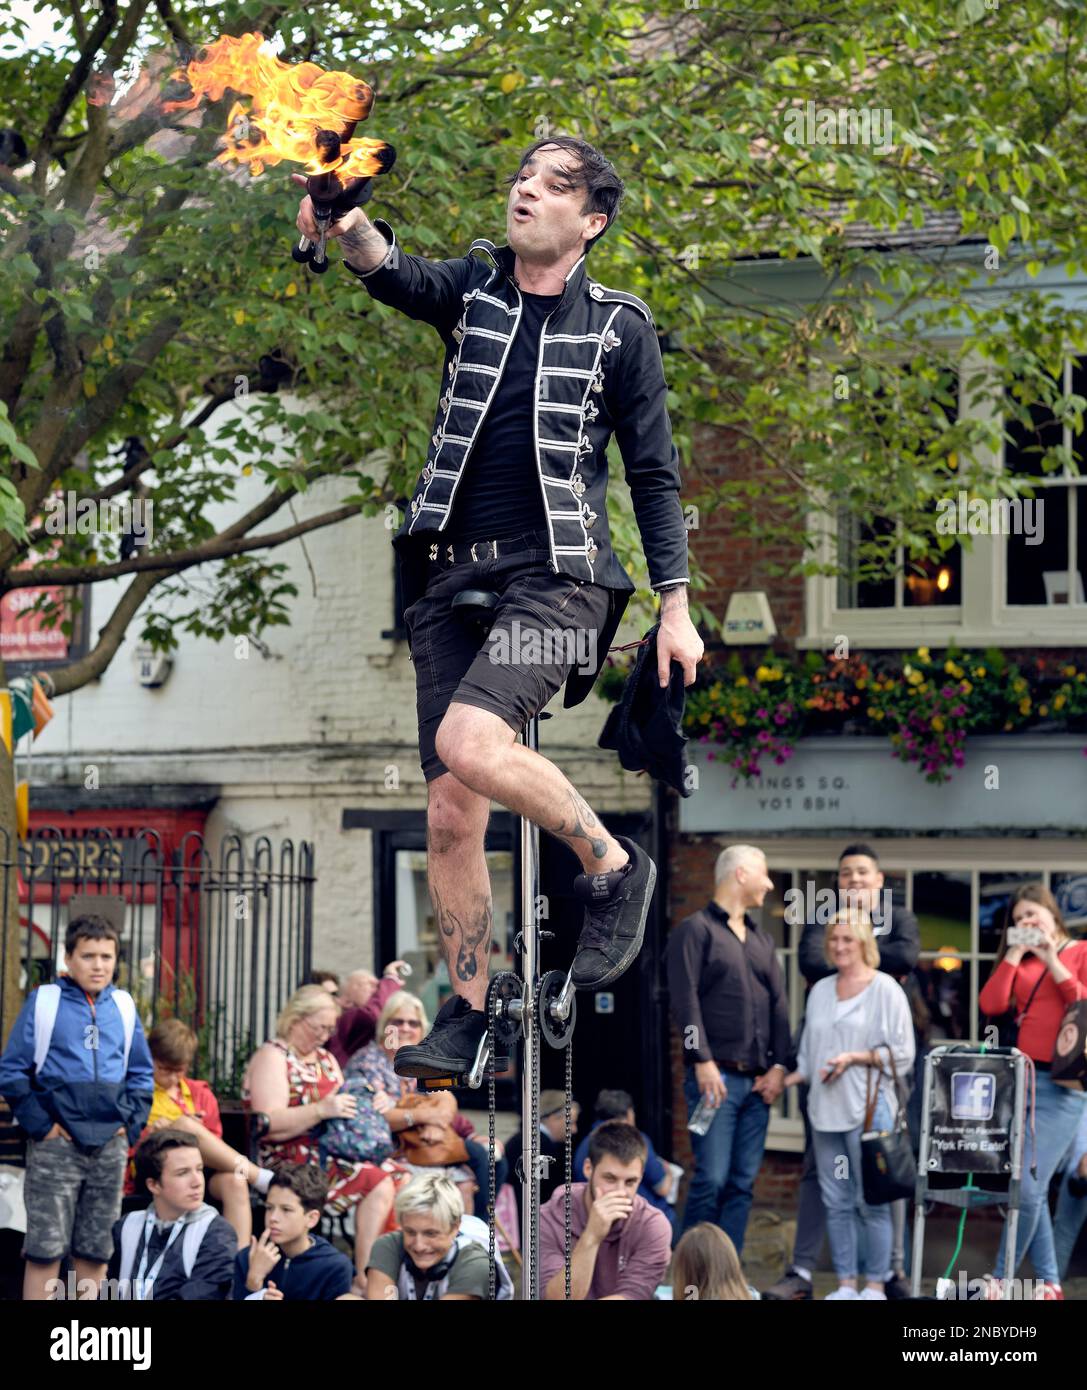 A street entertainer, juggling with clubs on fire, in the centre of York. Bystanders spectate in the background. Stock Photo